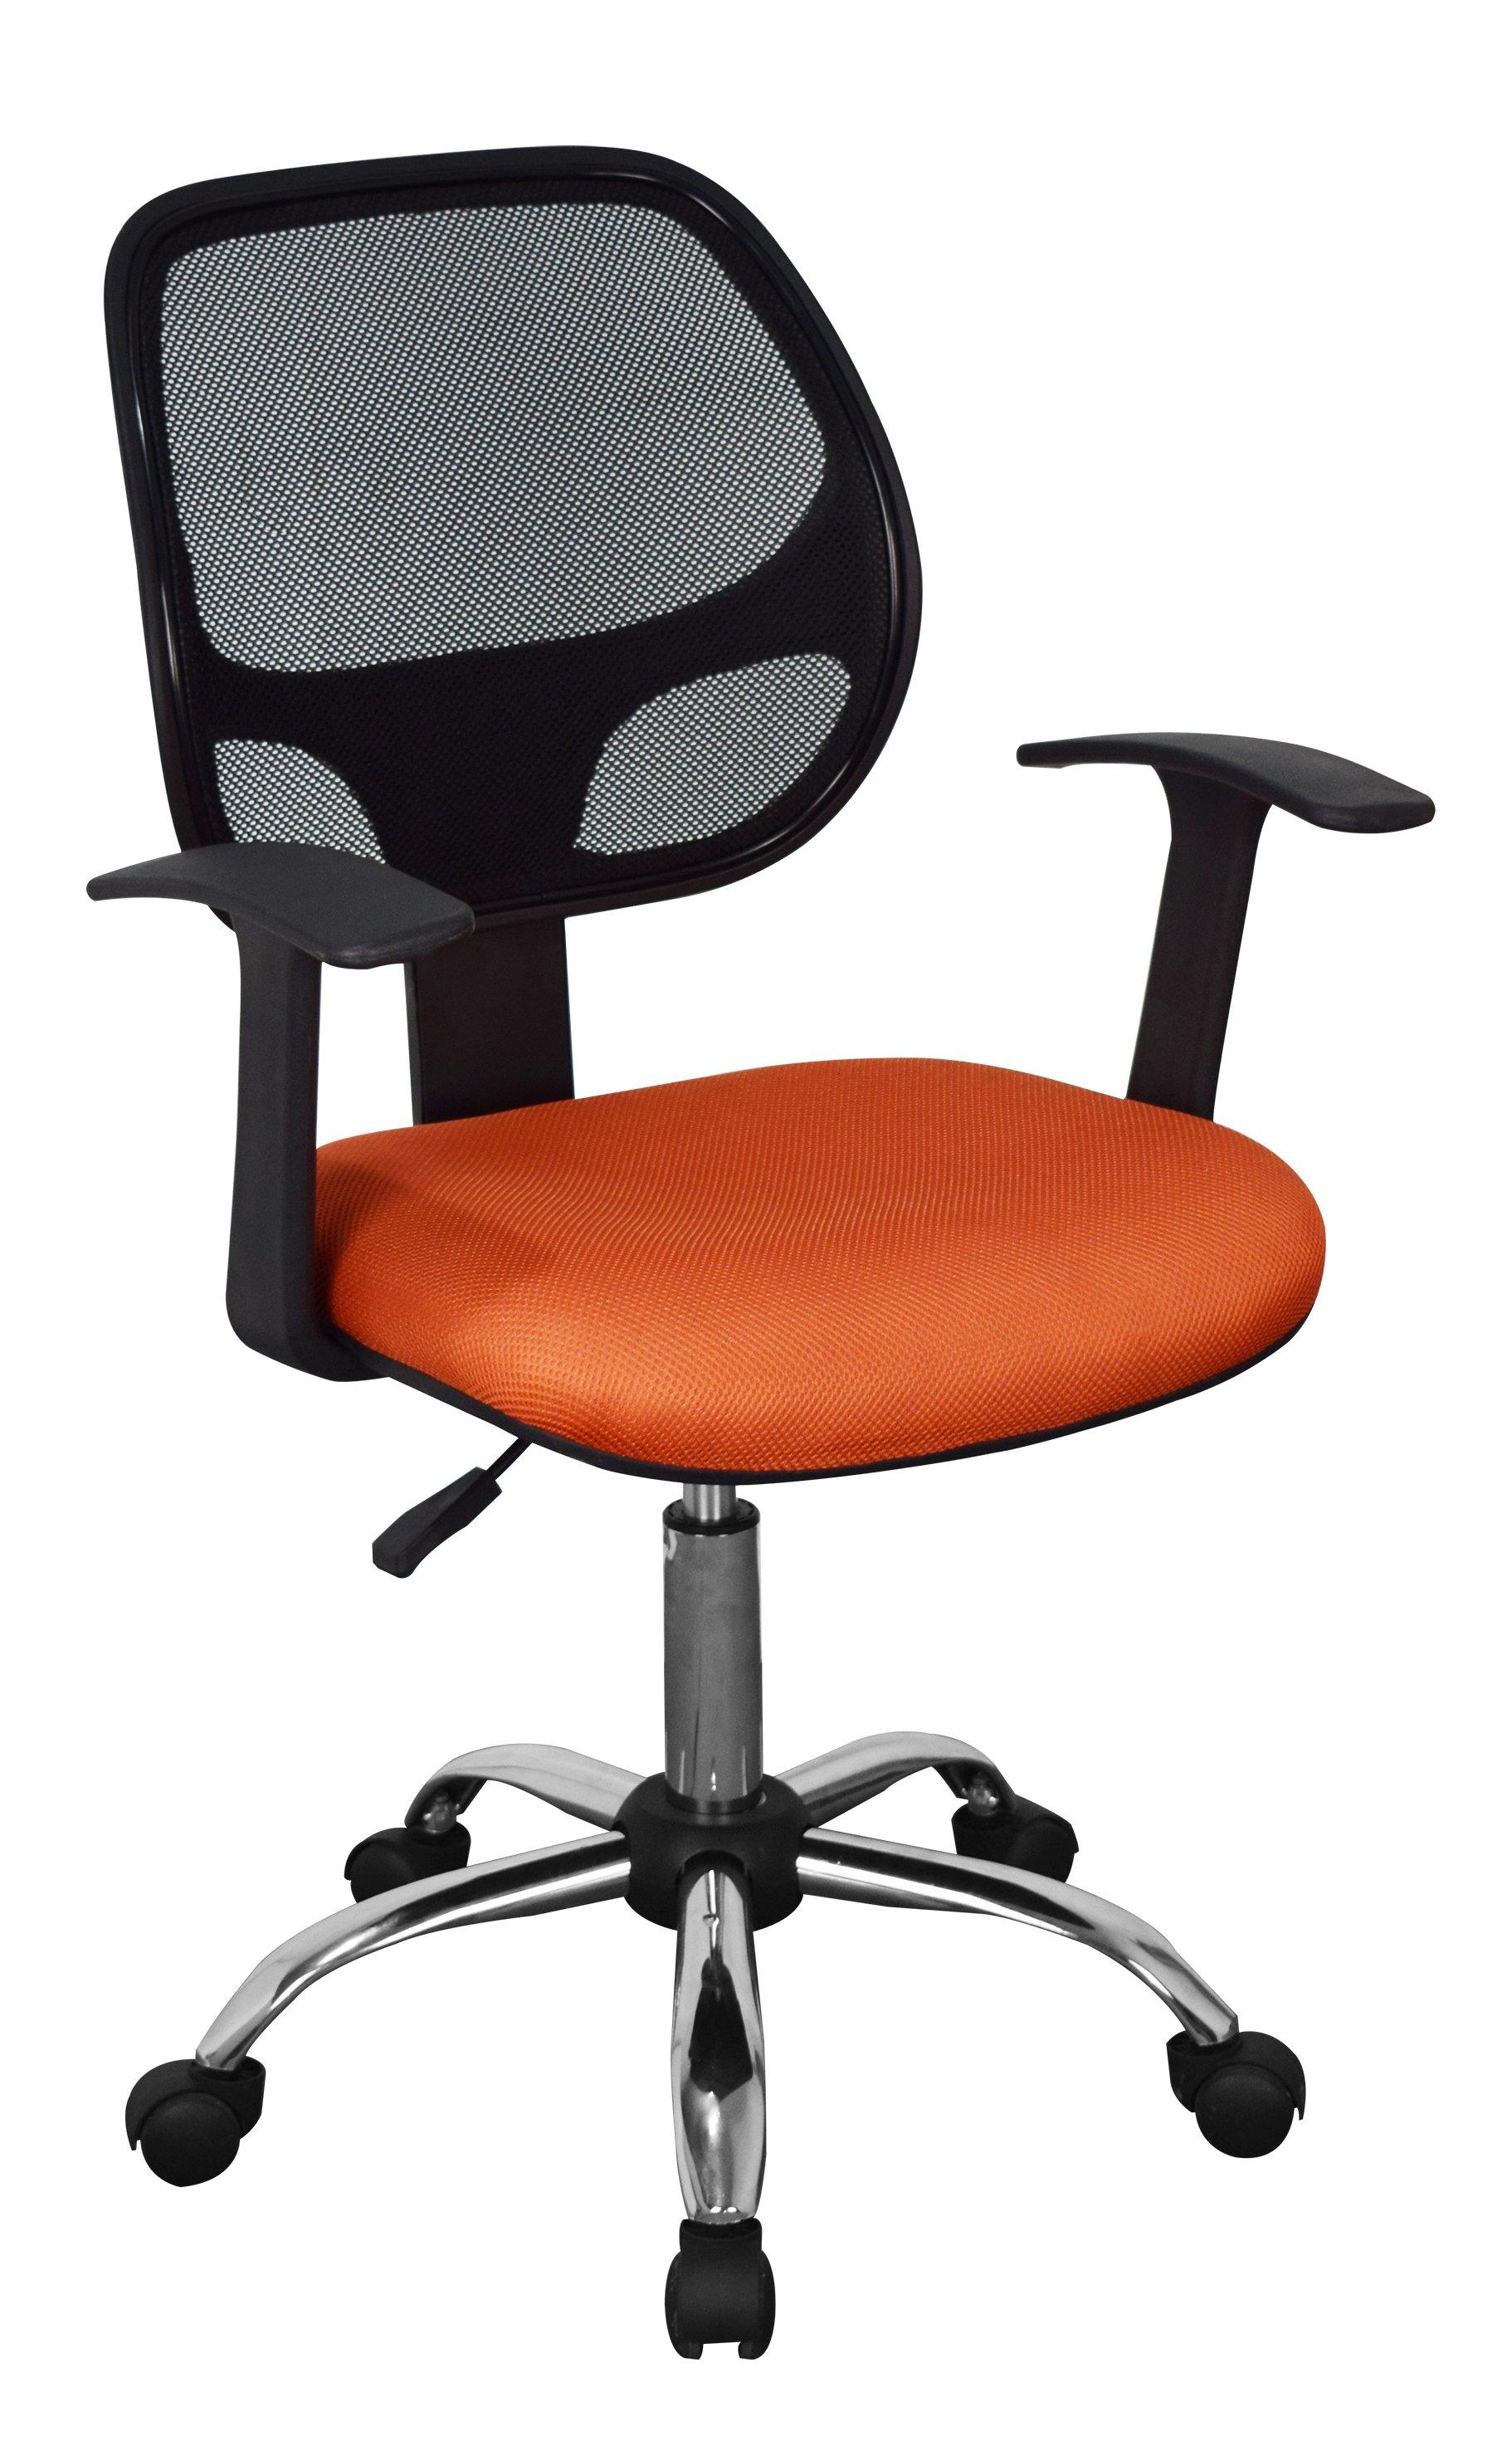 Loft Home Office Home Office Chair, Black Mesh Back, Orange Fabric Seat With Chrome Base